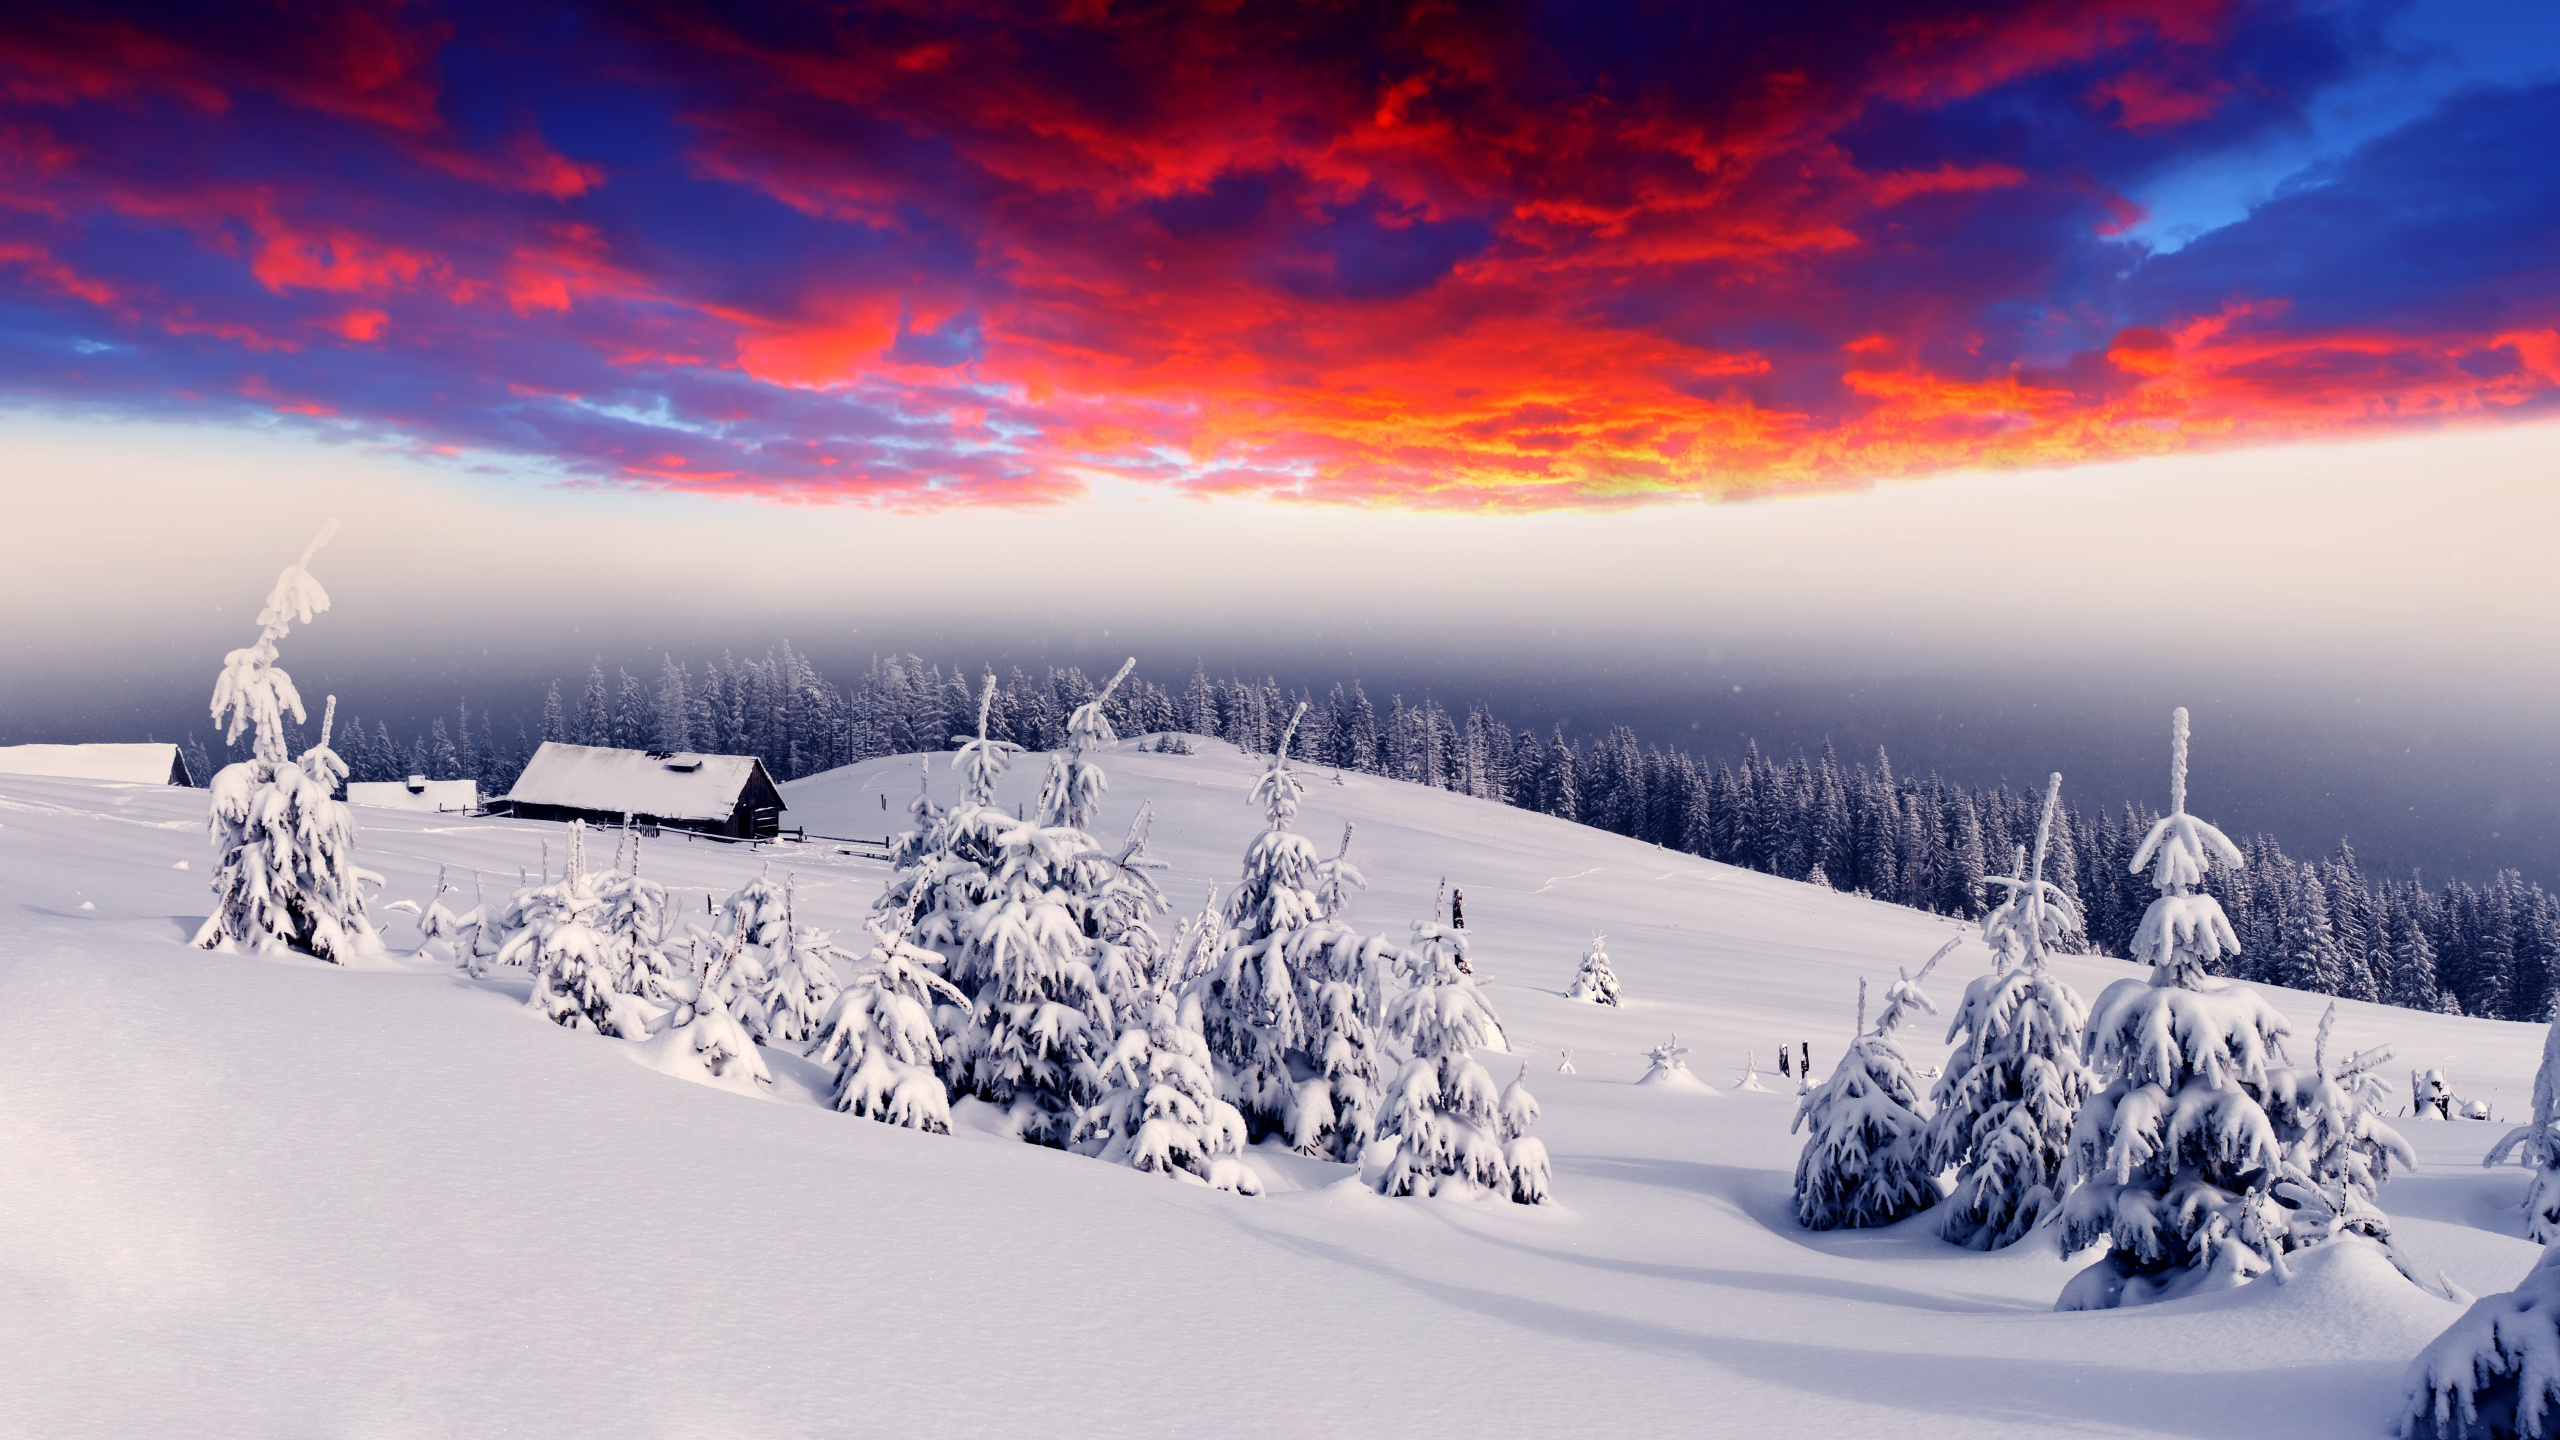 Snow Covered Field During Sunset. Wallpaper in 2560x1440 Resolution